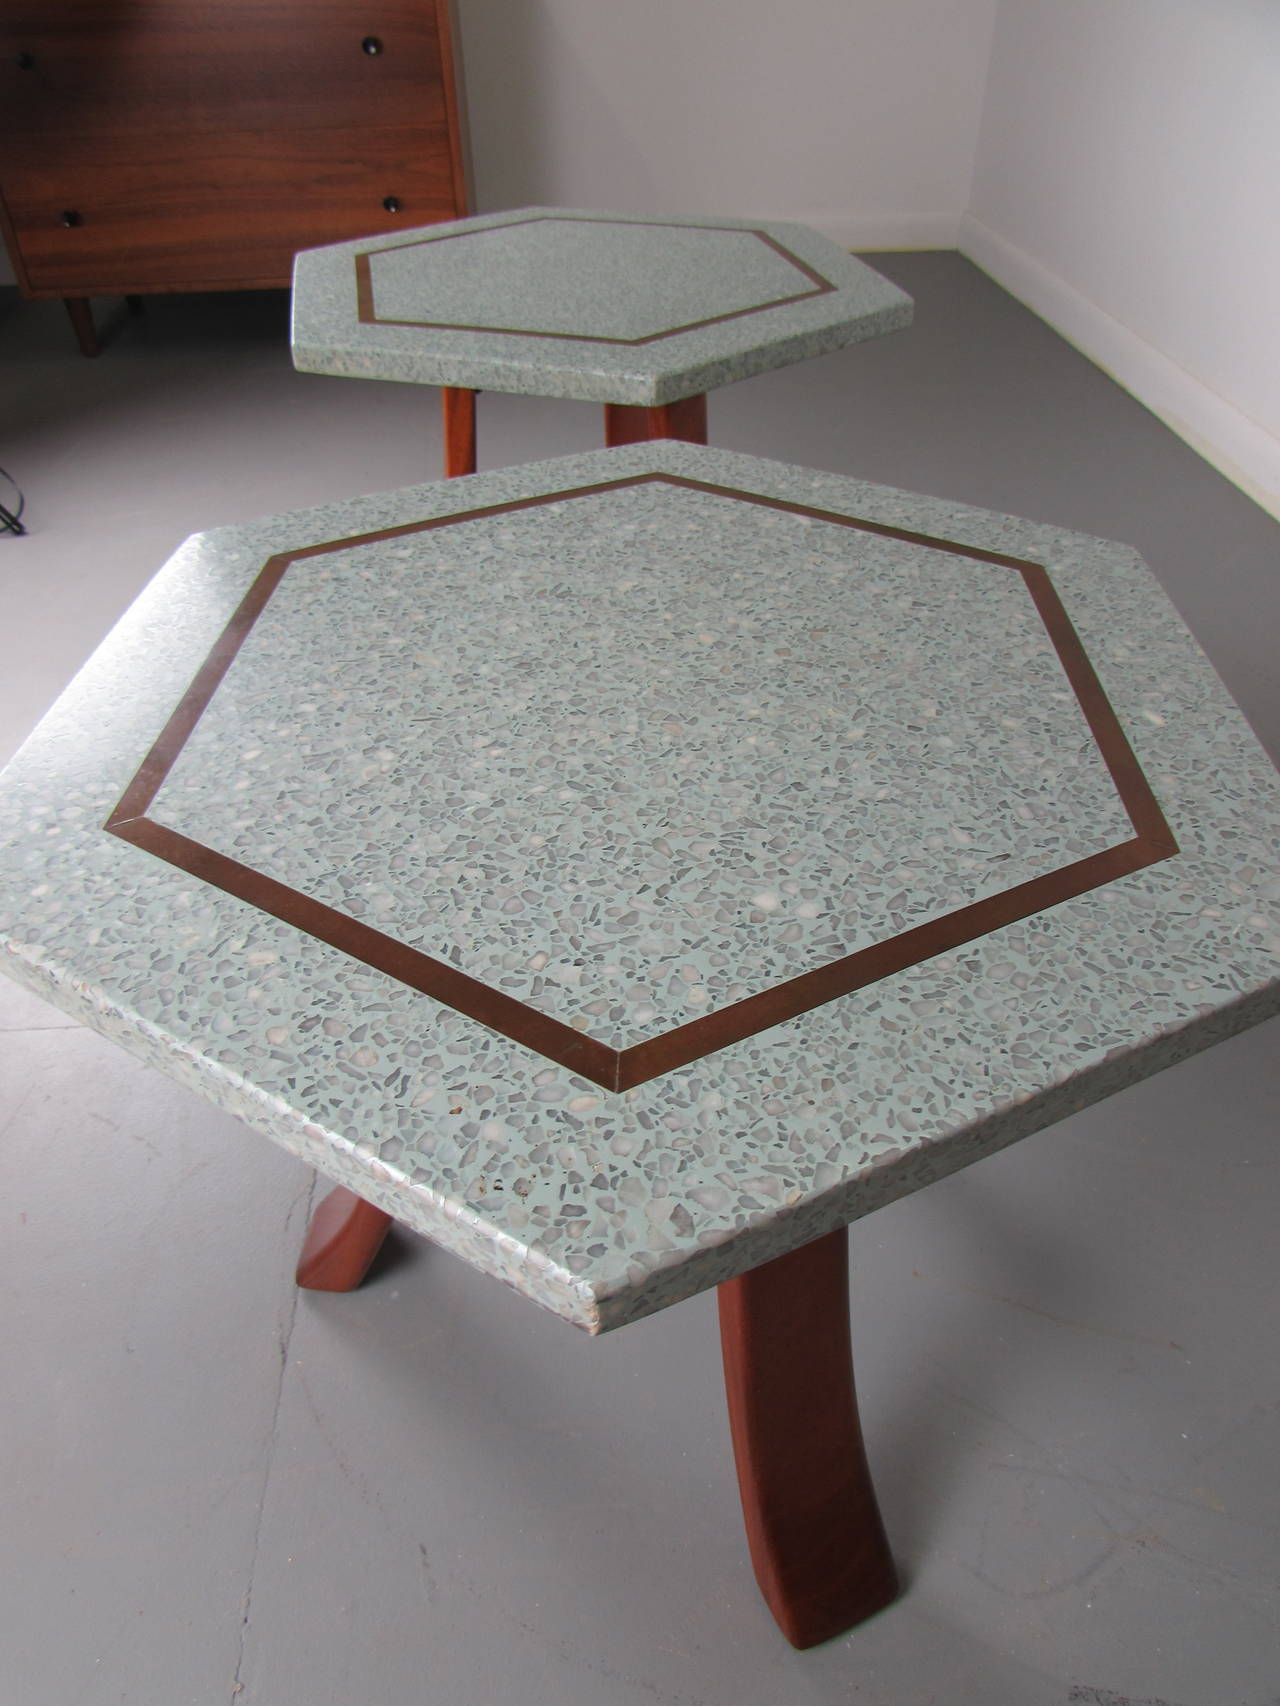 Inlay Pair of Sculptural Tables with Terrazzo and Brass Tops by Harvey Probber, 1960s